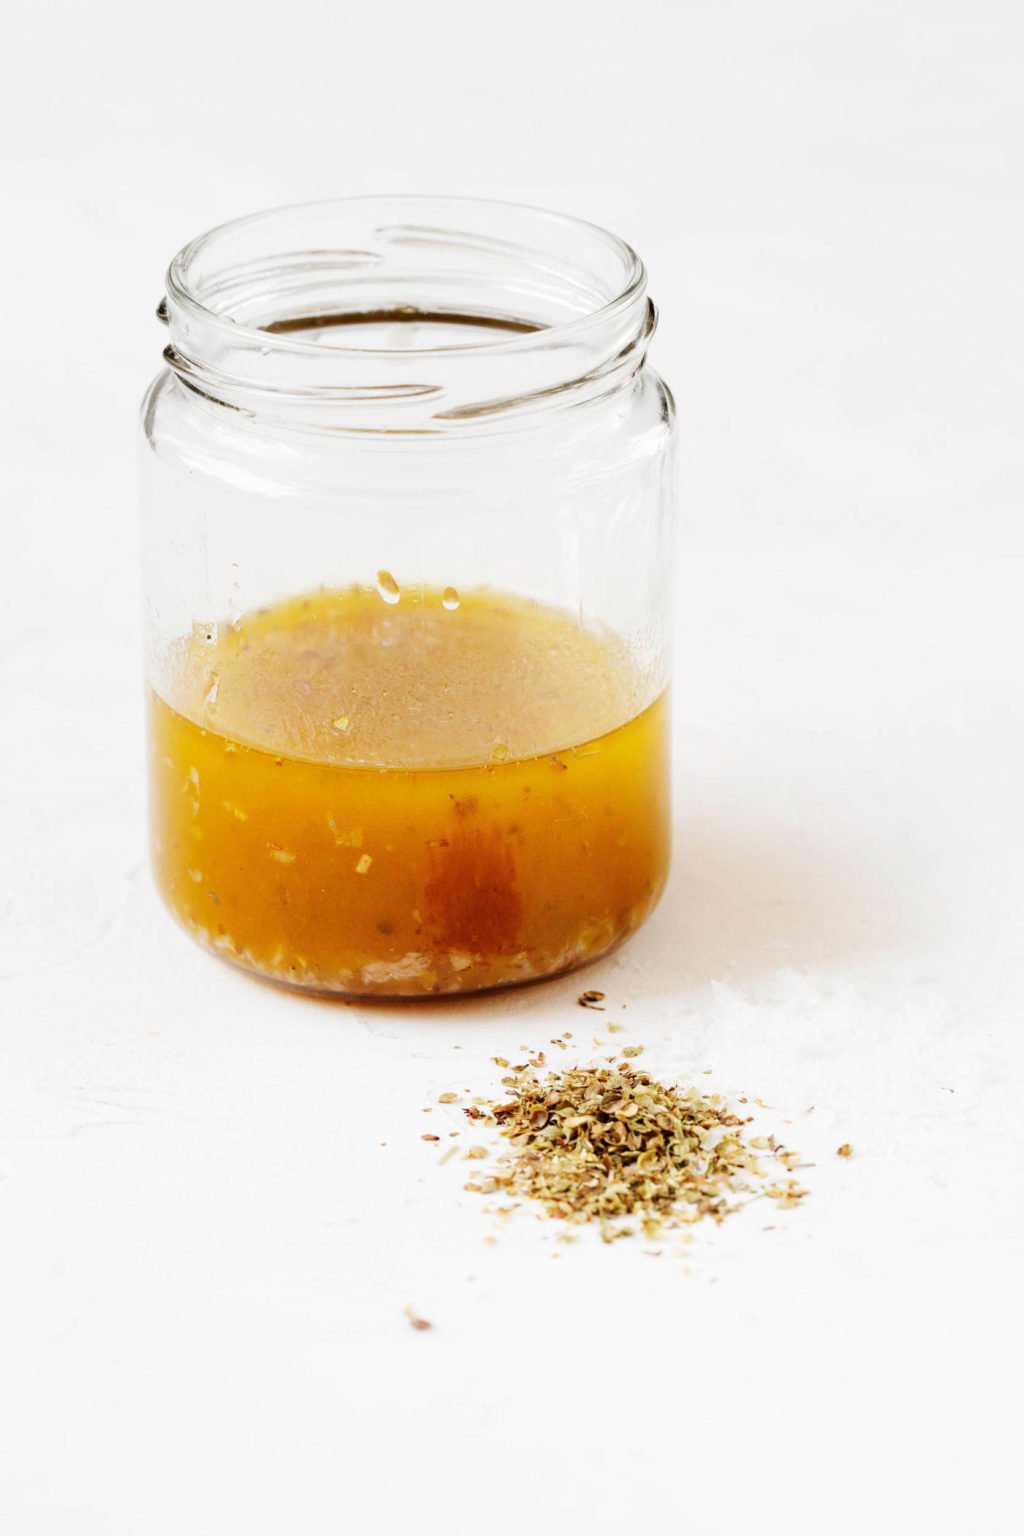 An angled photograph of a Greek vinaigrette dressing in a mason jar, with a pat of dried oregano on a white surface in front of it.